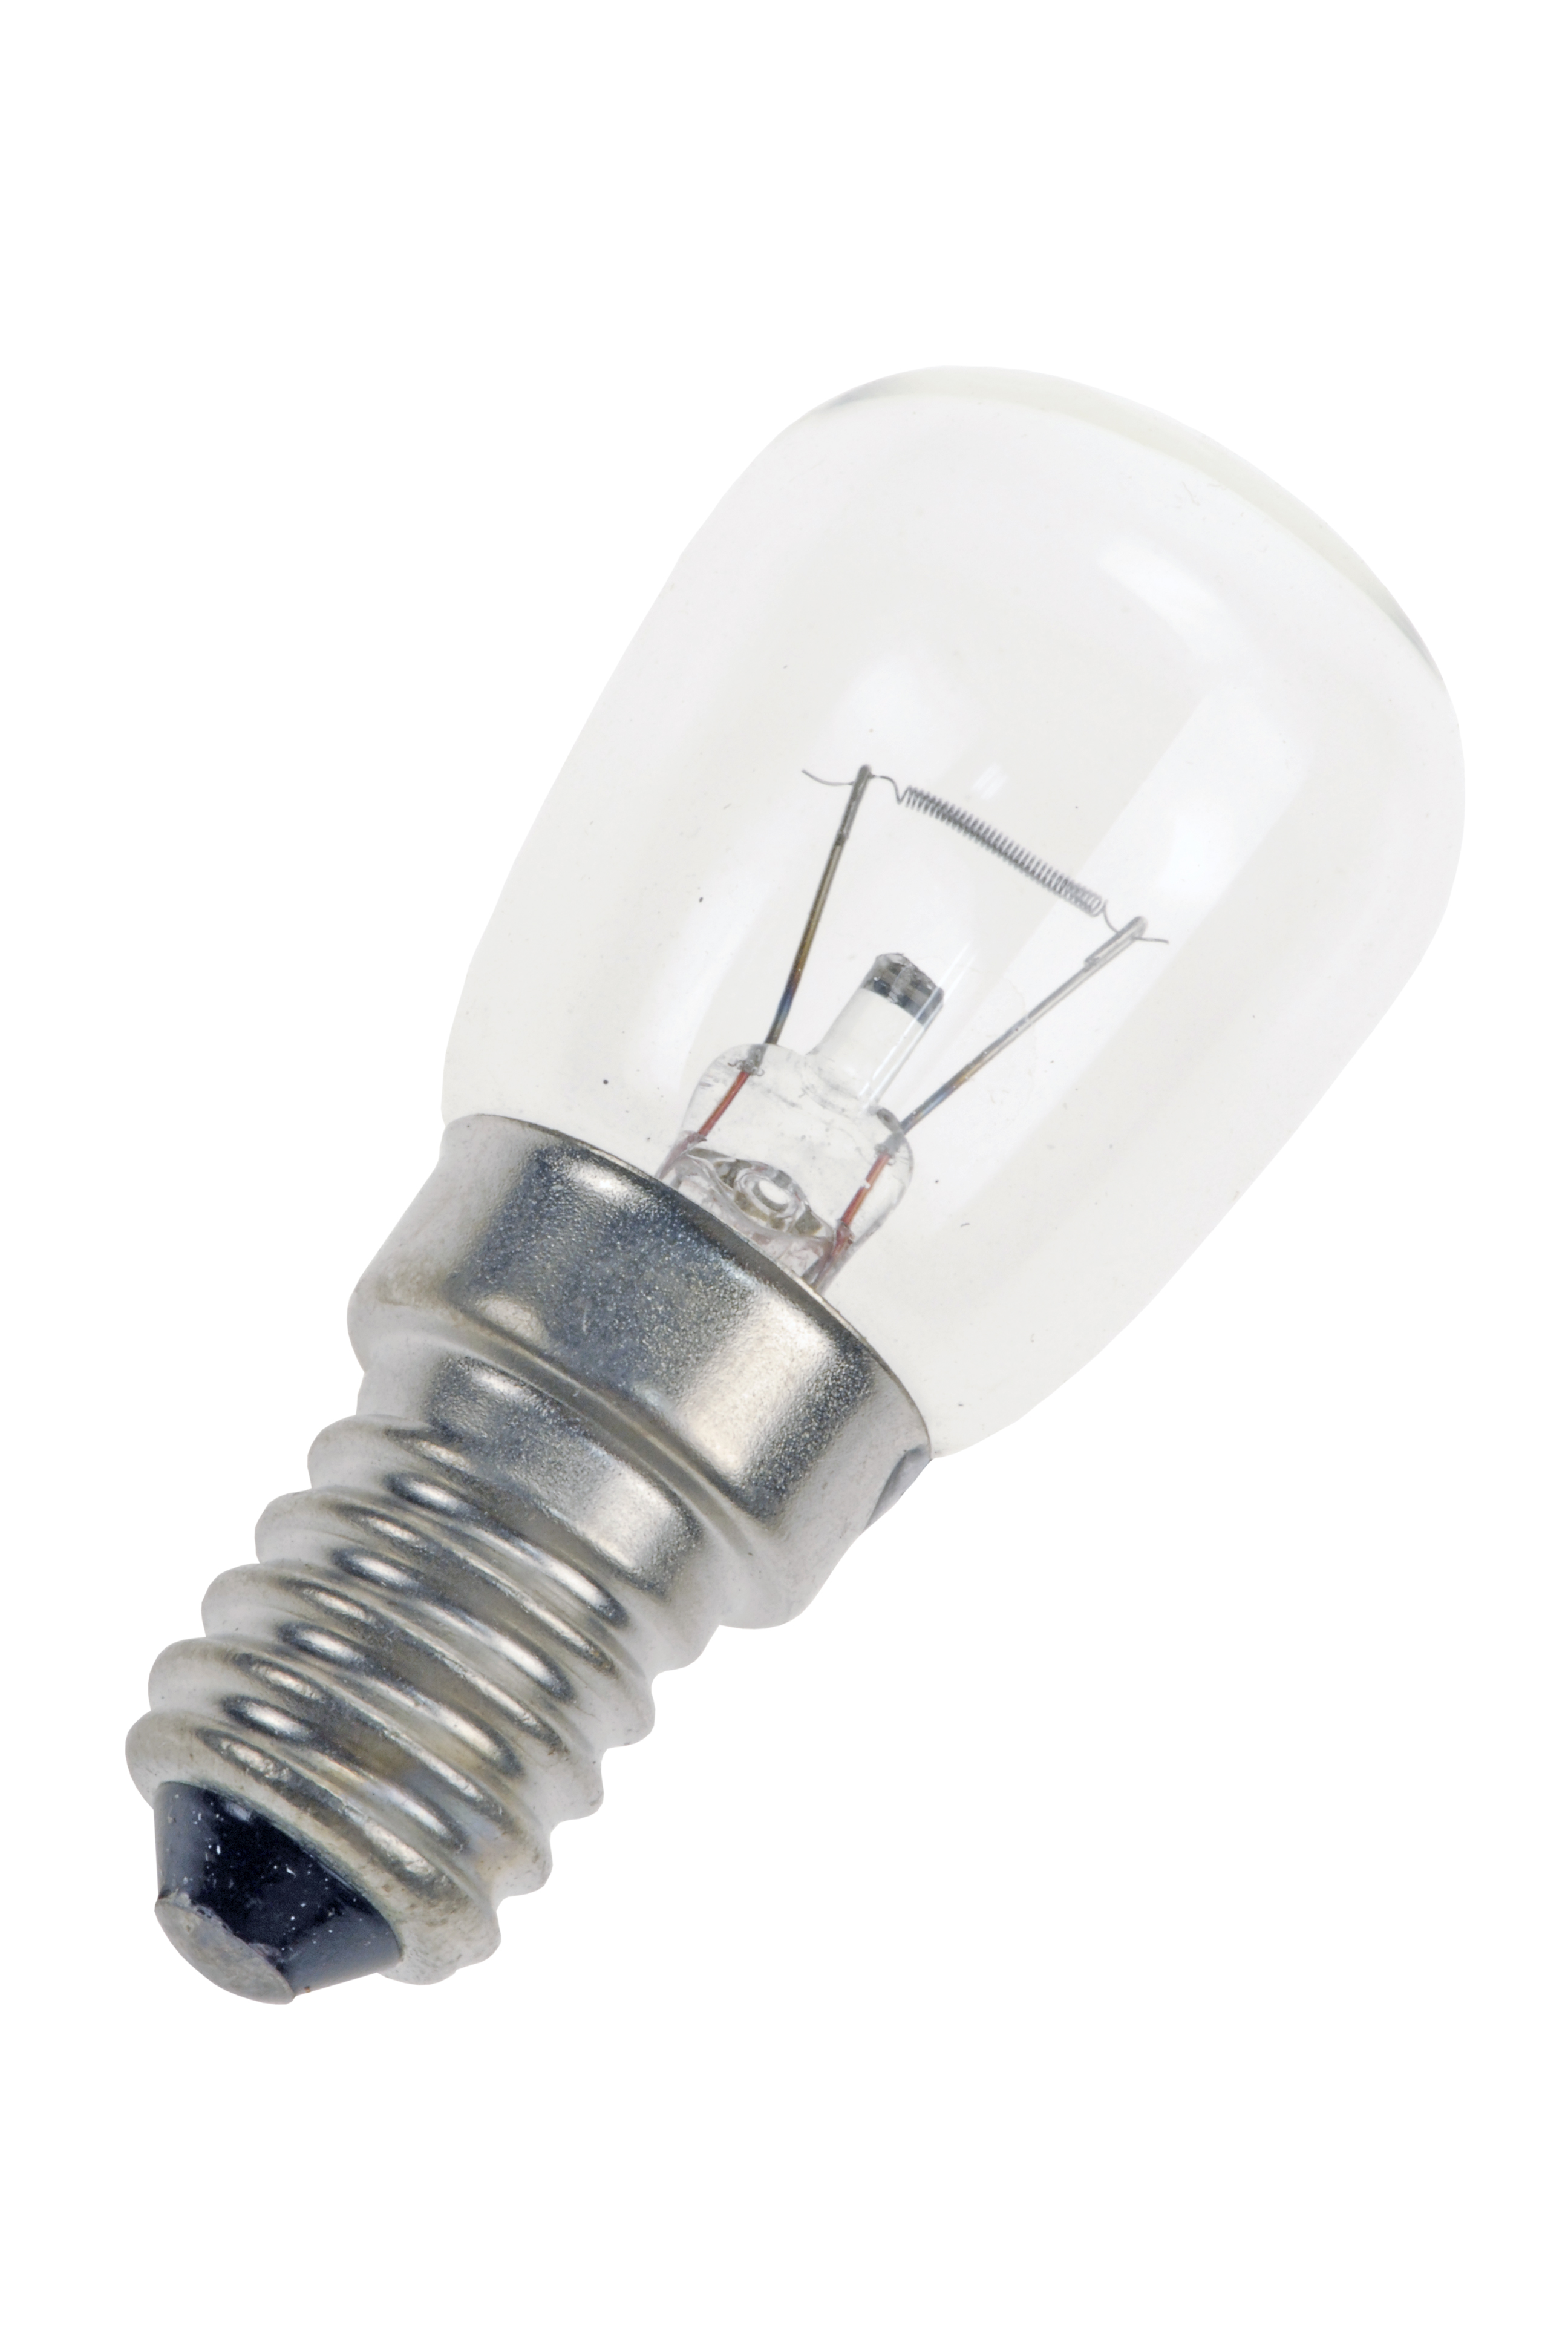 Incandescent lamp tube-shaped